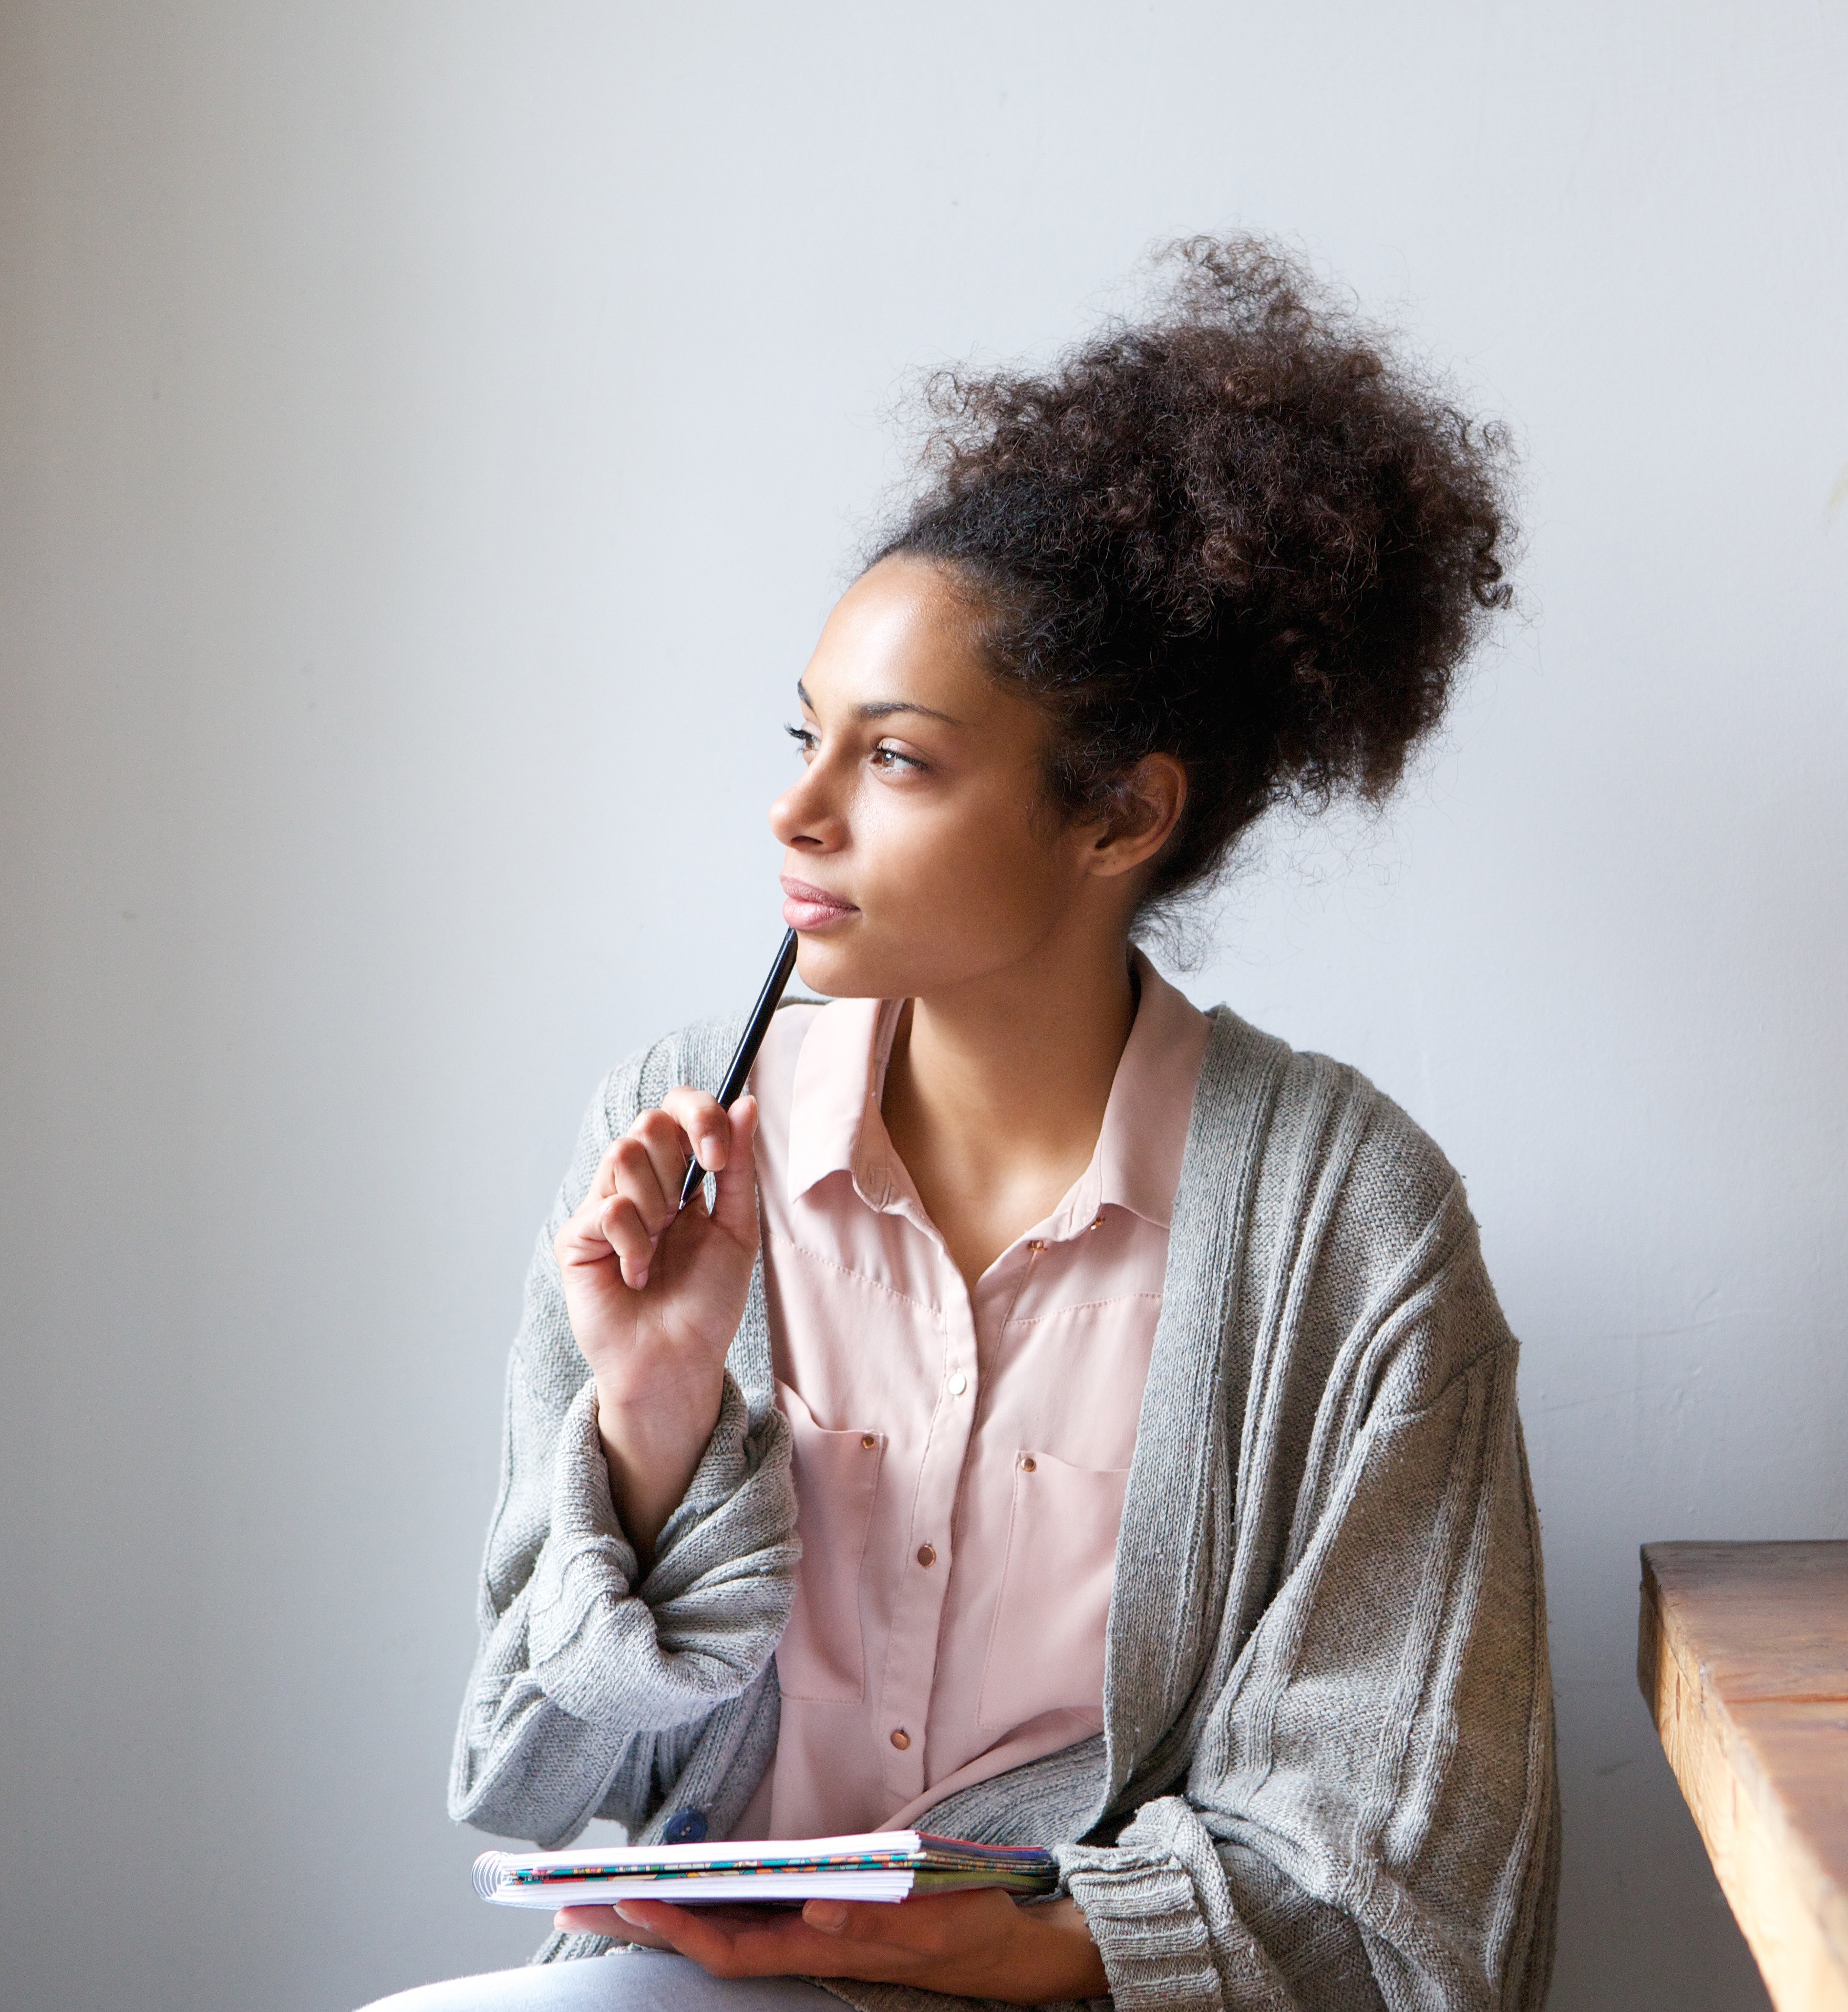 Portrait of a young woman sitting at home with pen and paper